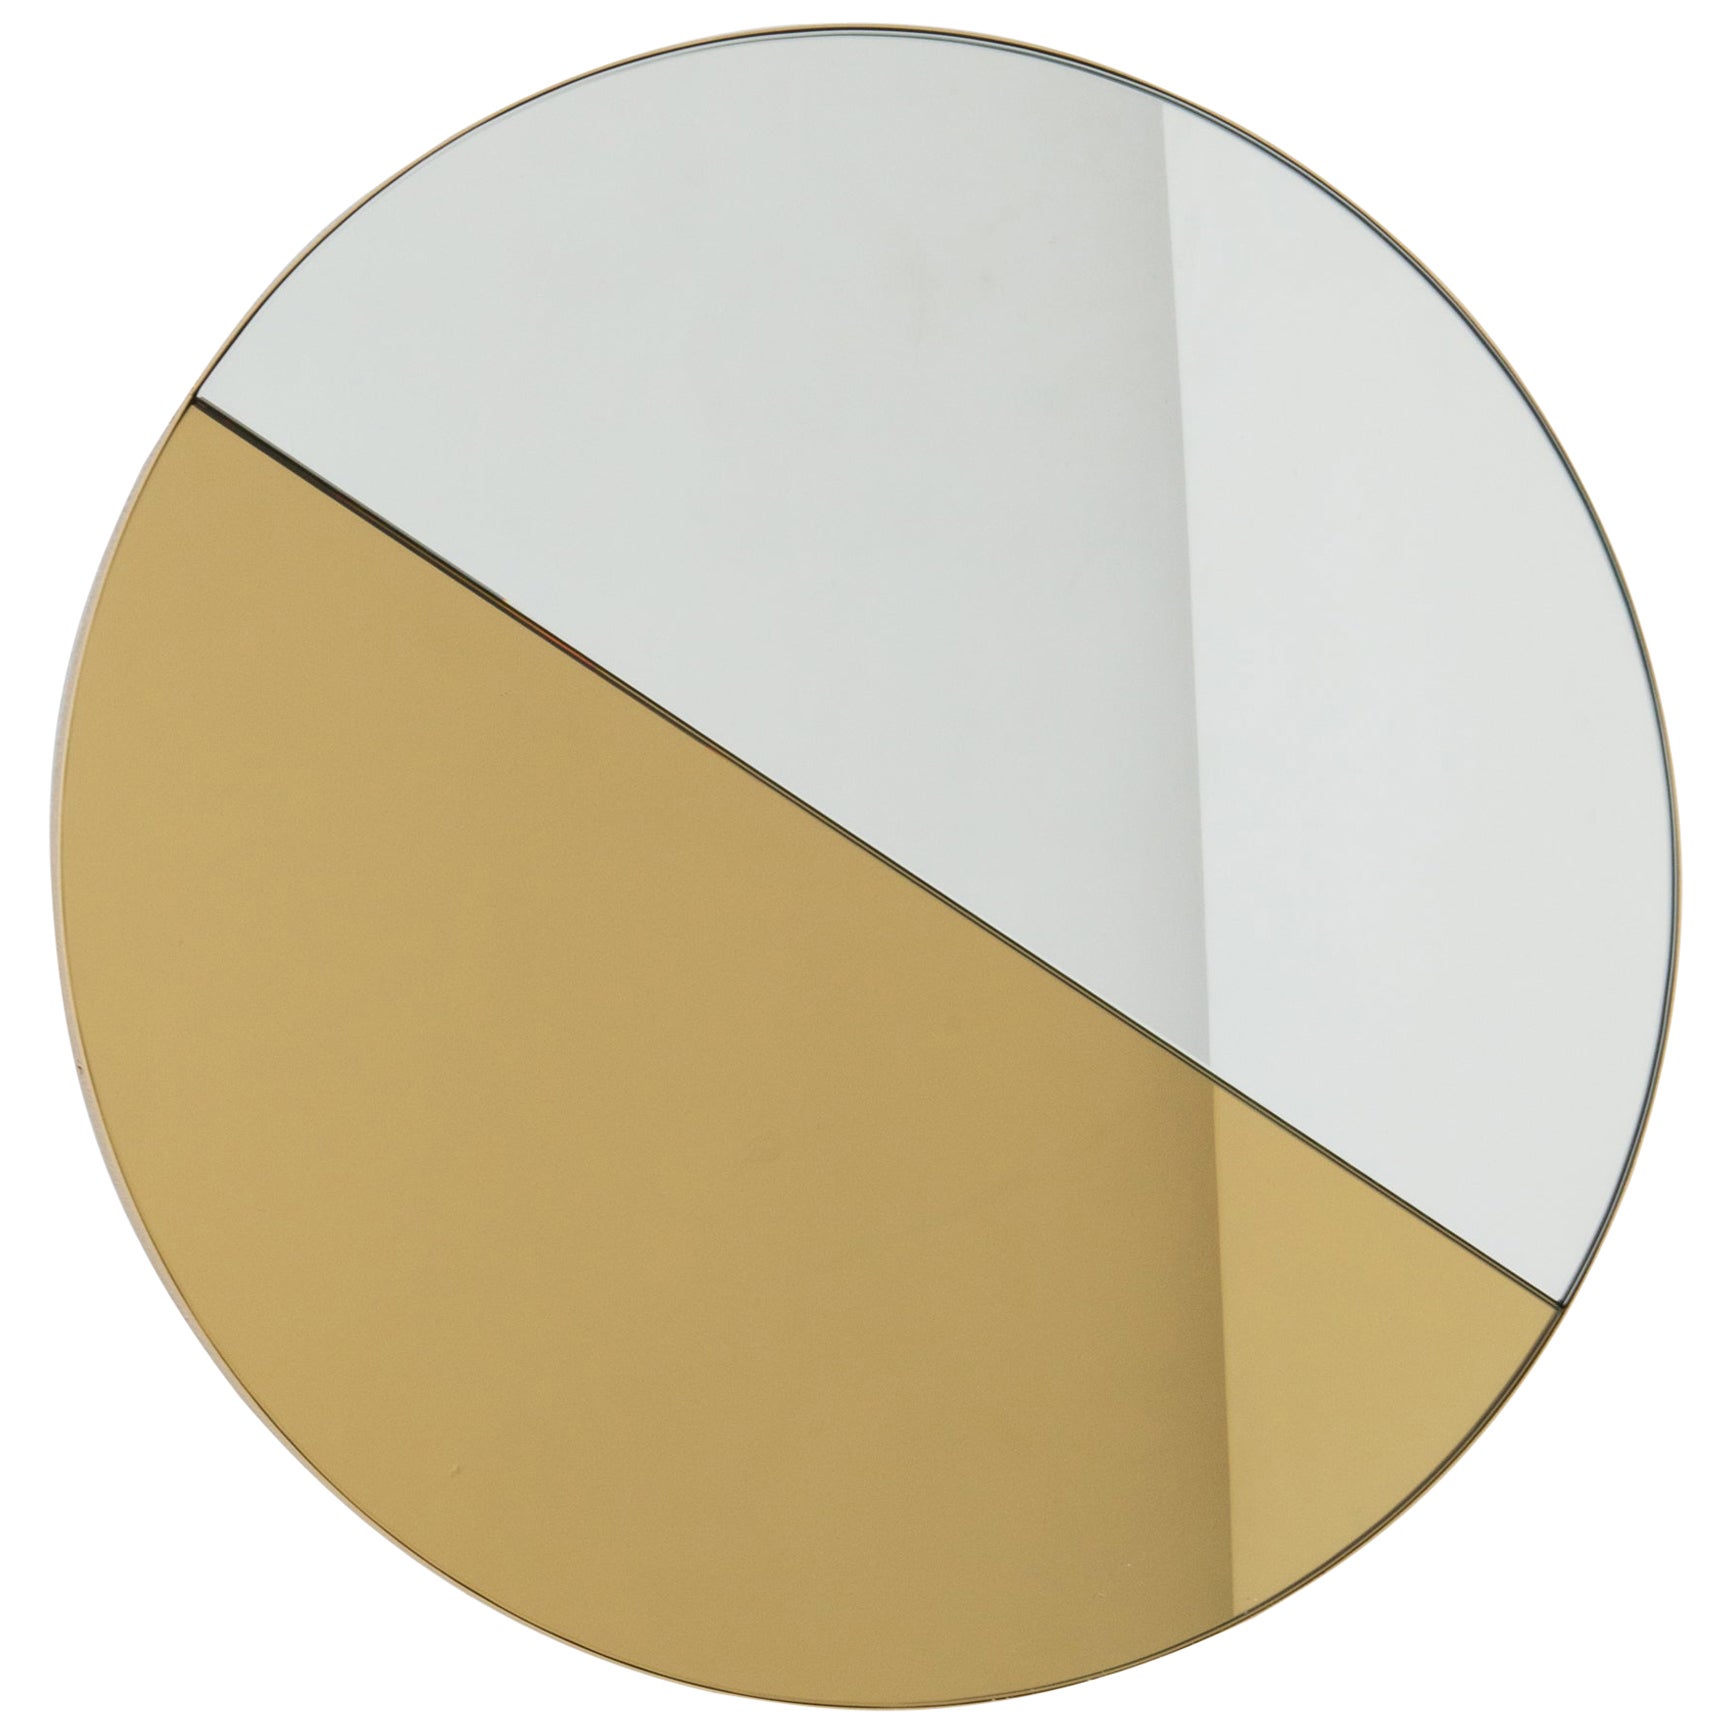 Orbis Dualis Mixed Gold and Silver Tinted Round Mirror with Brass Frame, Regular For Sale